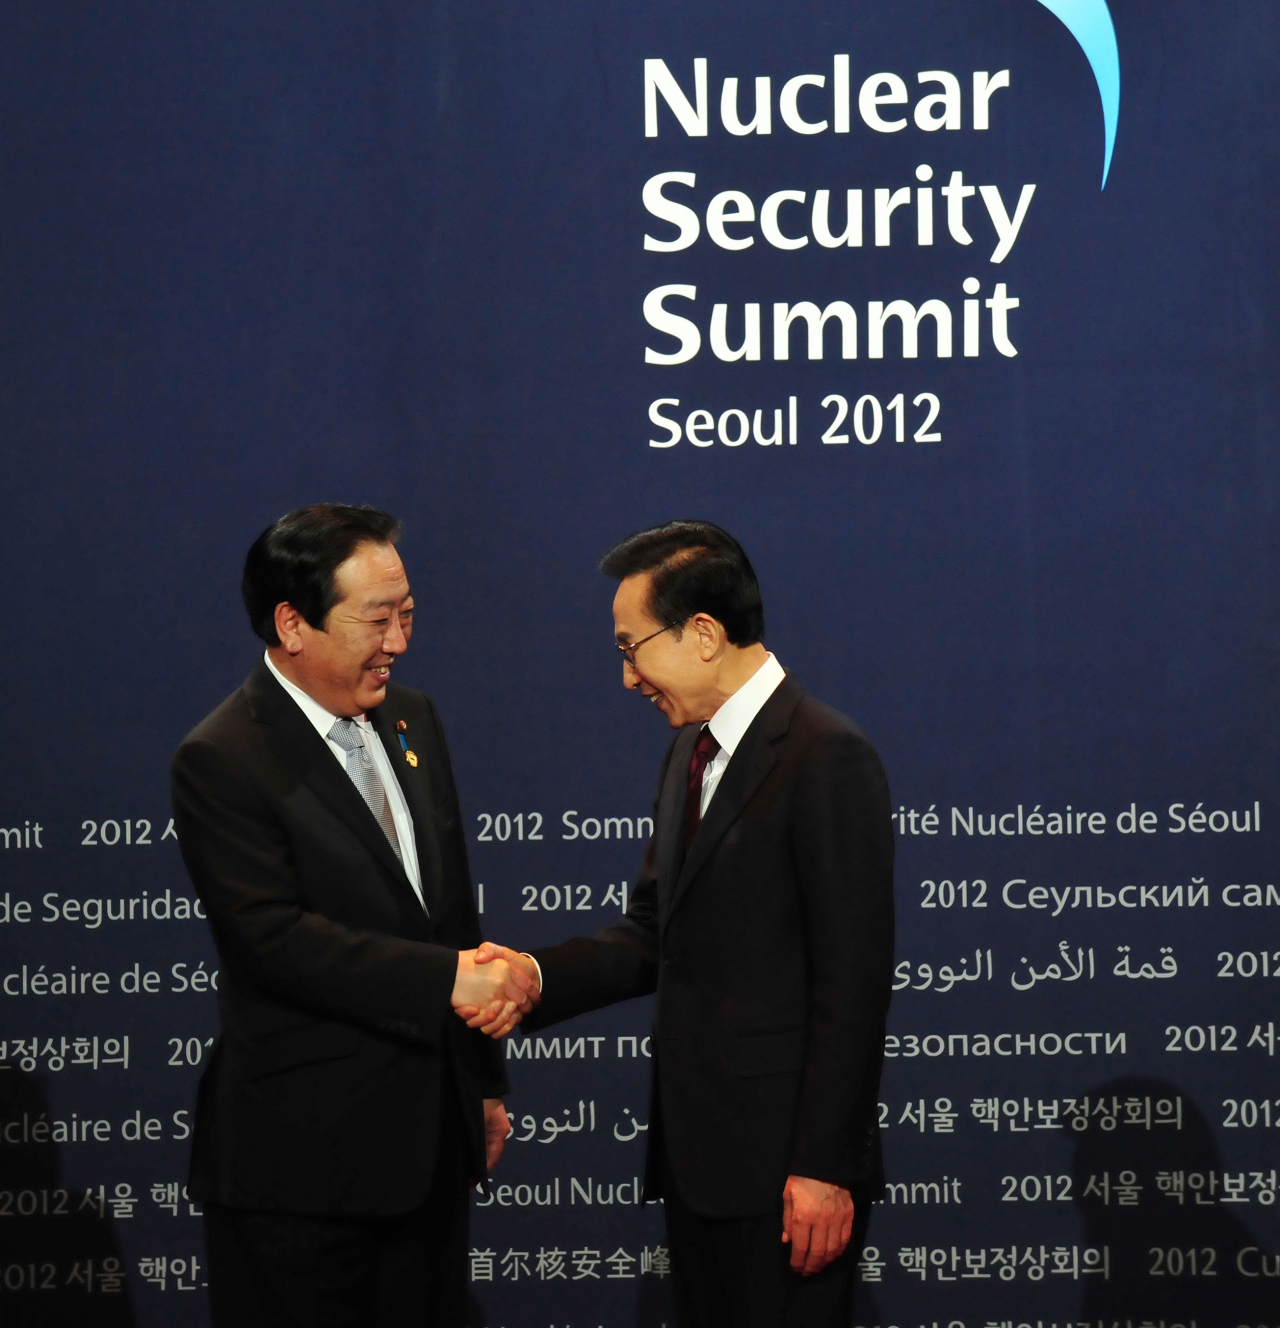 Then-President Lee Myung-bak (right) shakes hands with then-Japanese Prime Minister Yoshihiko Noda at the Nuclear Security Talks in Seoul on March 27, 2012. (The Korea Herald)